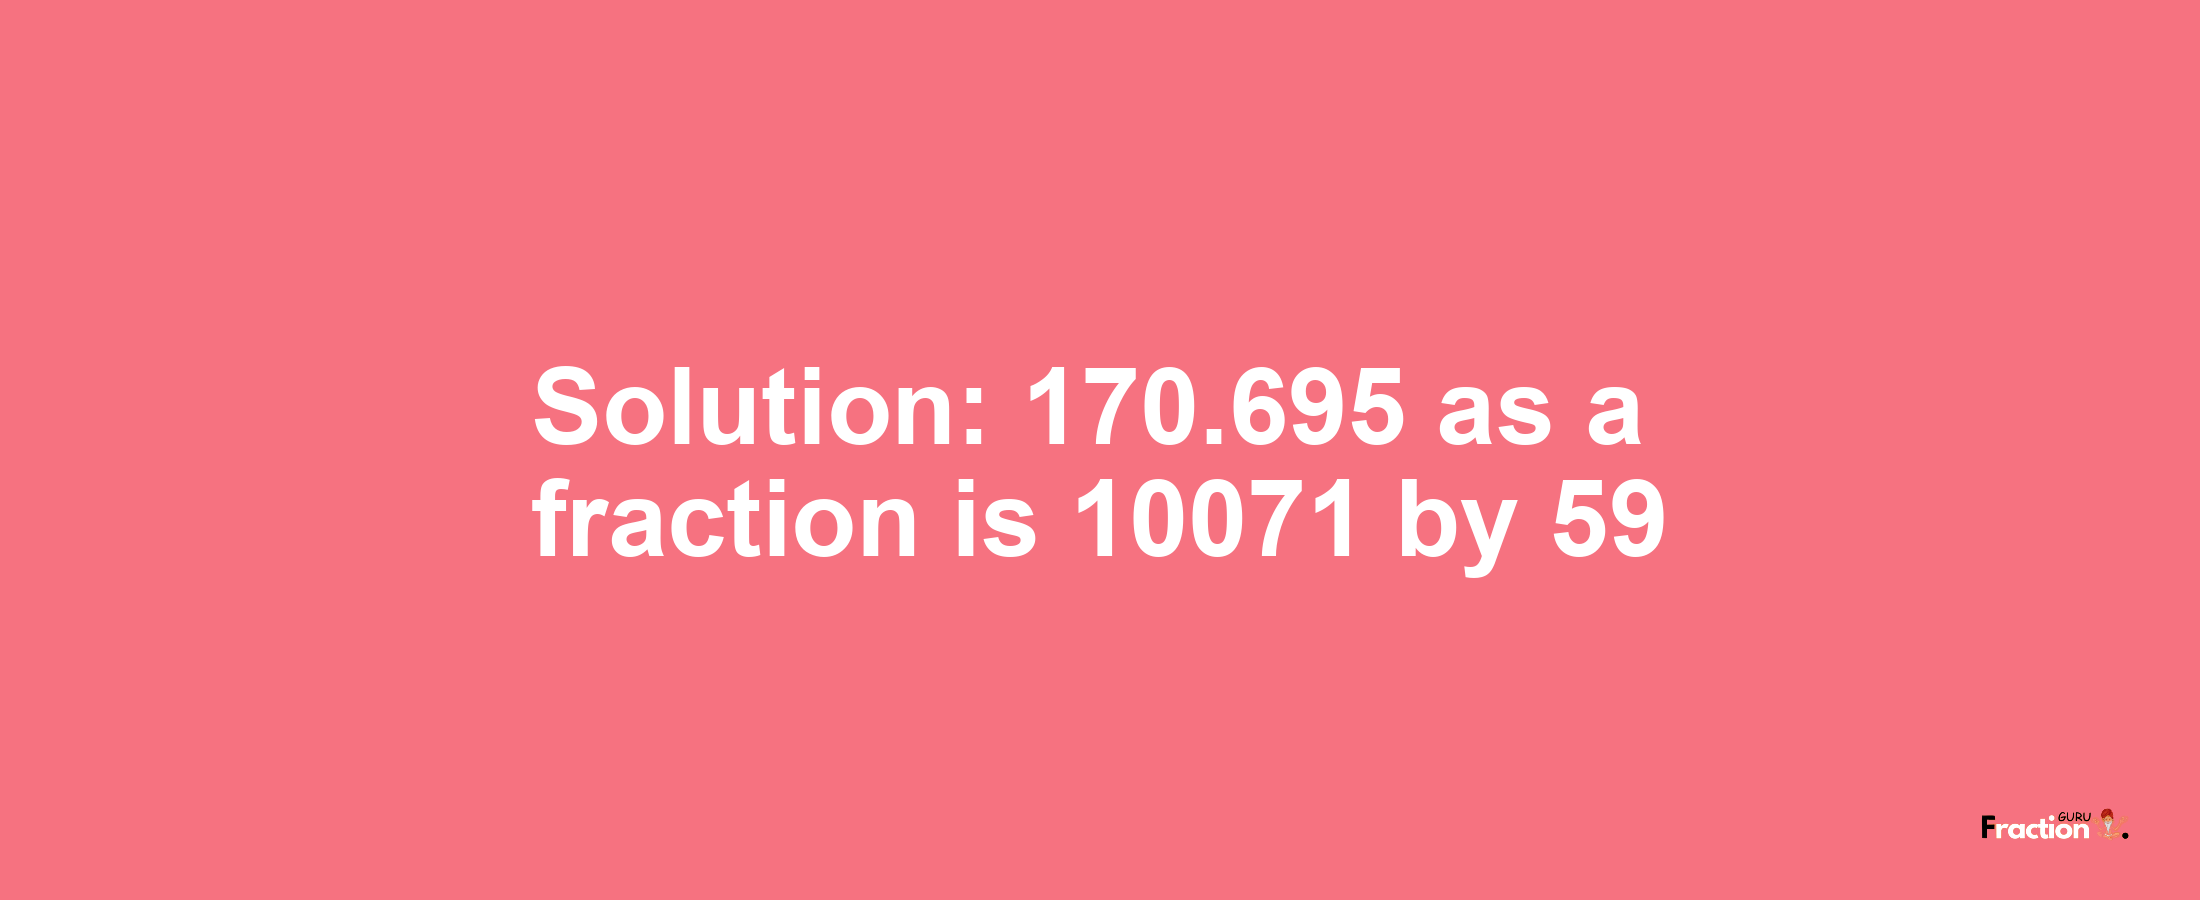 Solution:170.695 as a fraction is 10071/59